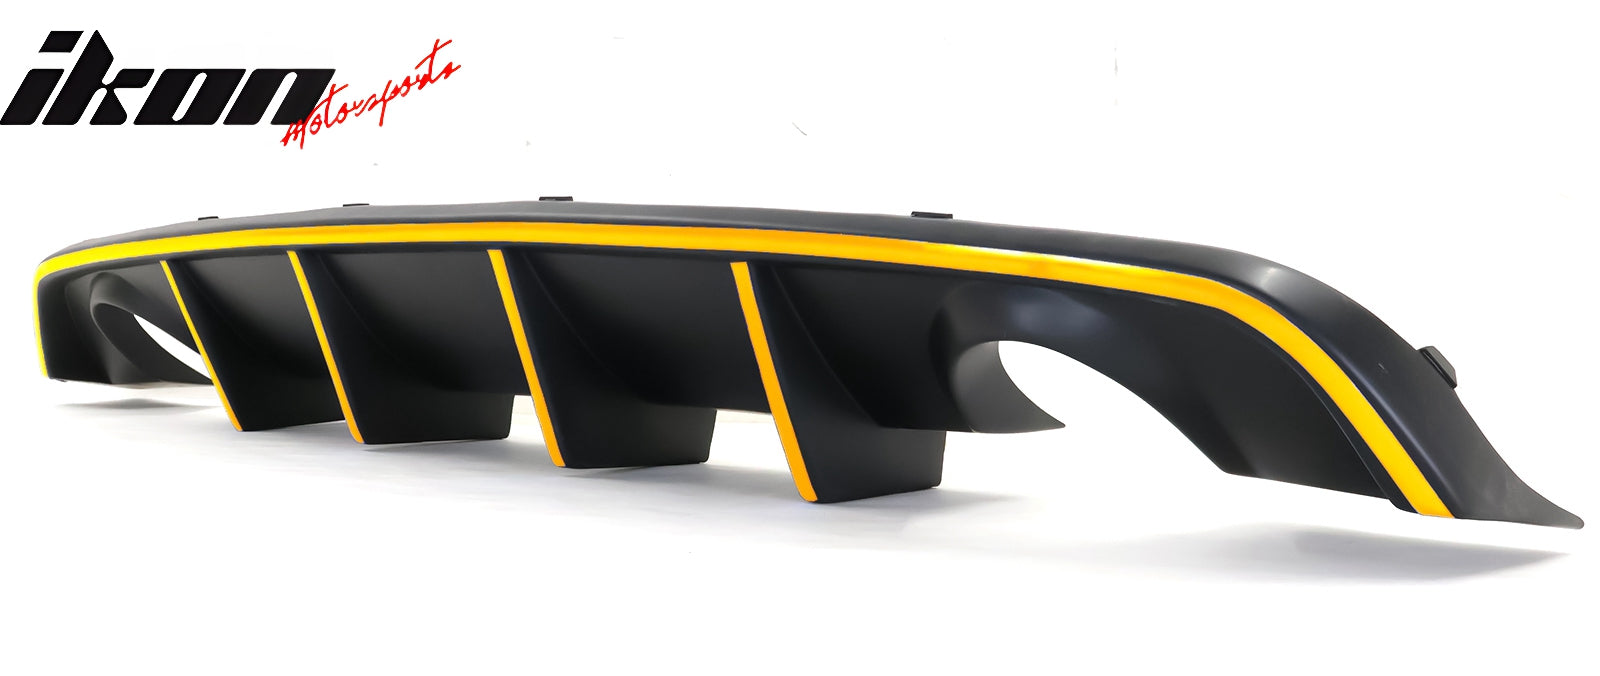 For 12-14 Dodge Charger SRT8 V2 Style Rear Diffuser PP w/ Yellow Reflective Tape